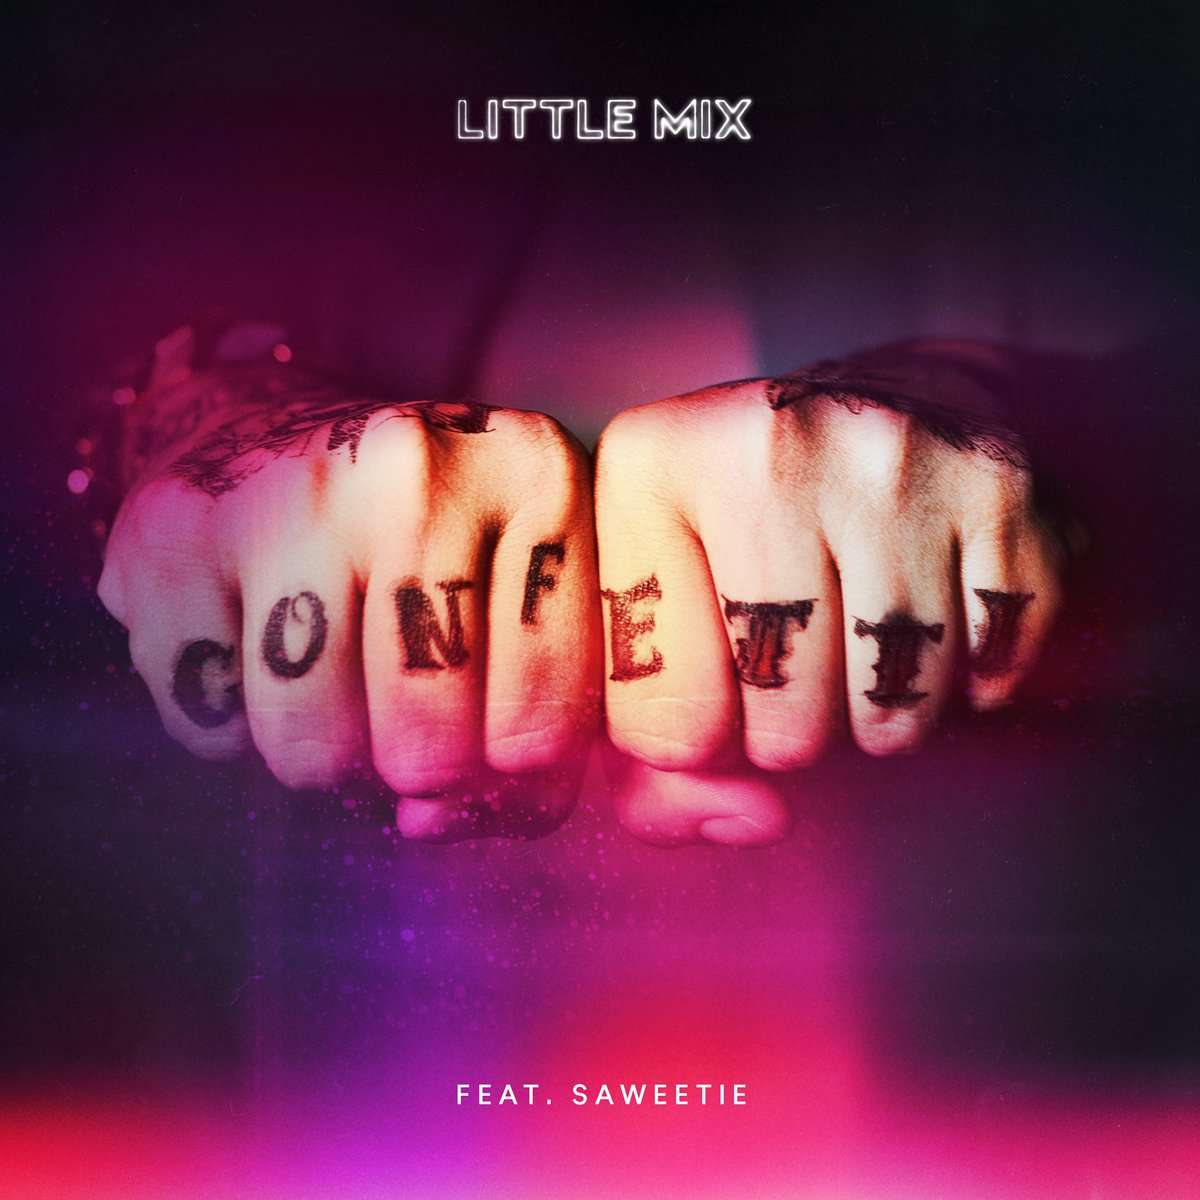 Little Mix on Twitter: "Confetti with @Saweetie Out 30.04 🖤 https://t.co/EyFB5eZJ8U… "